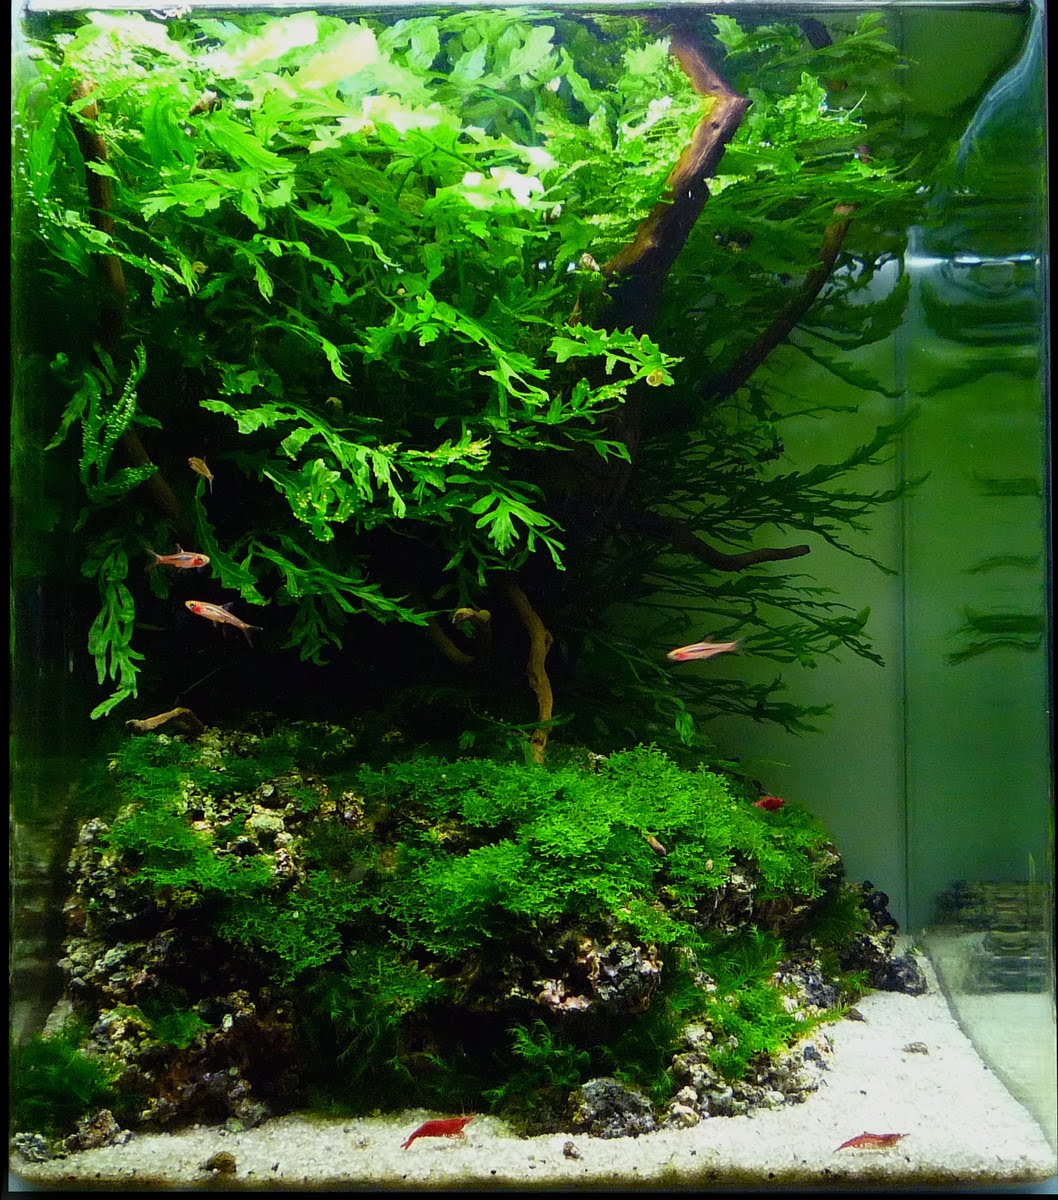 Manage your freshwater aquarium, tropical fishes and plants: Aquatic Scapers Europe 